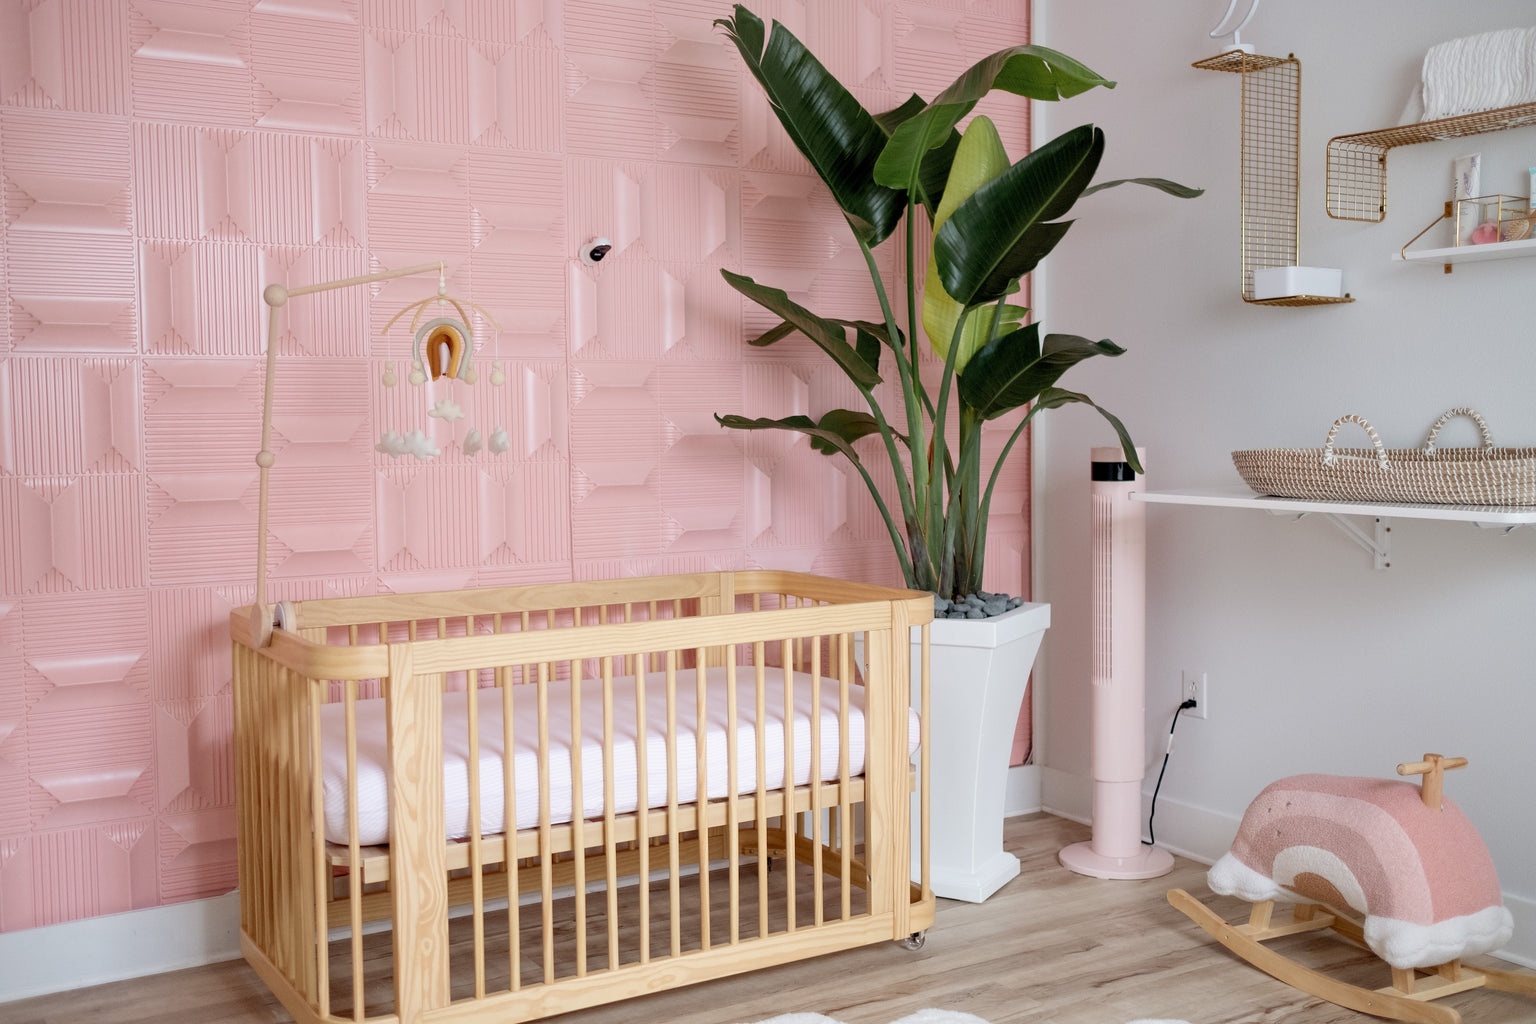 Transforming the Nursery with a DIY Accent Wall